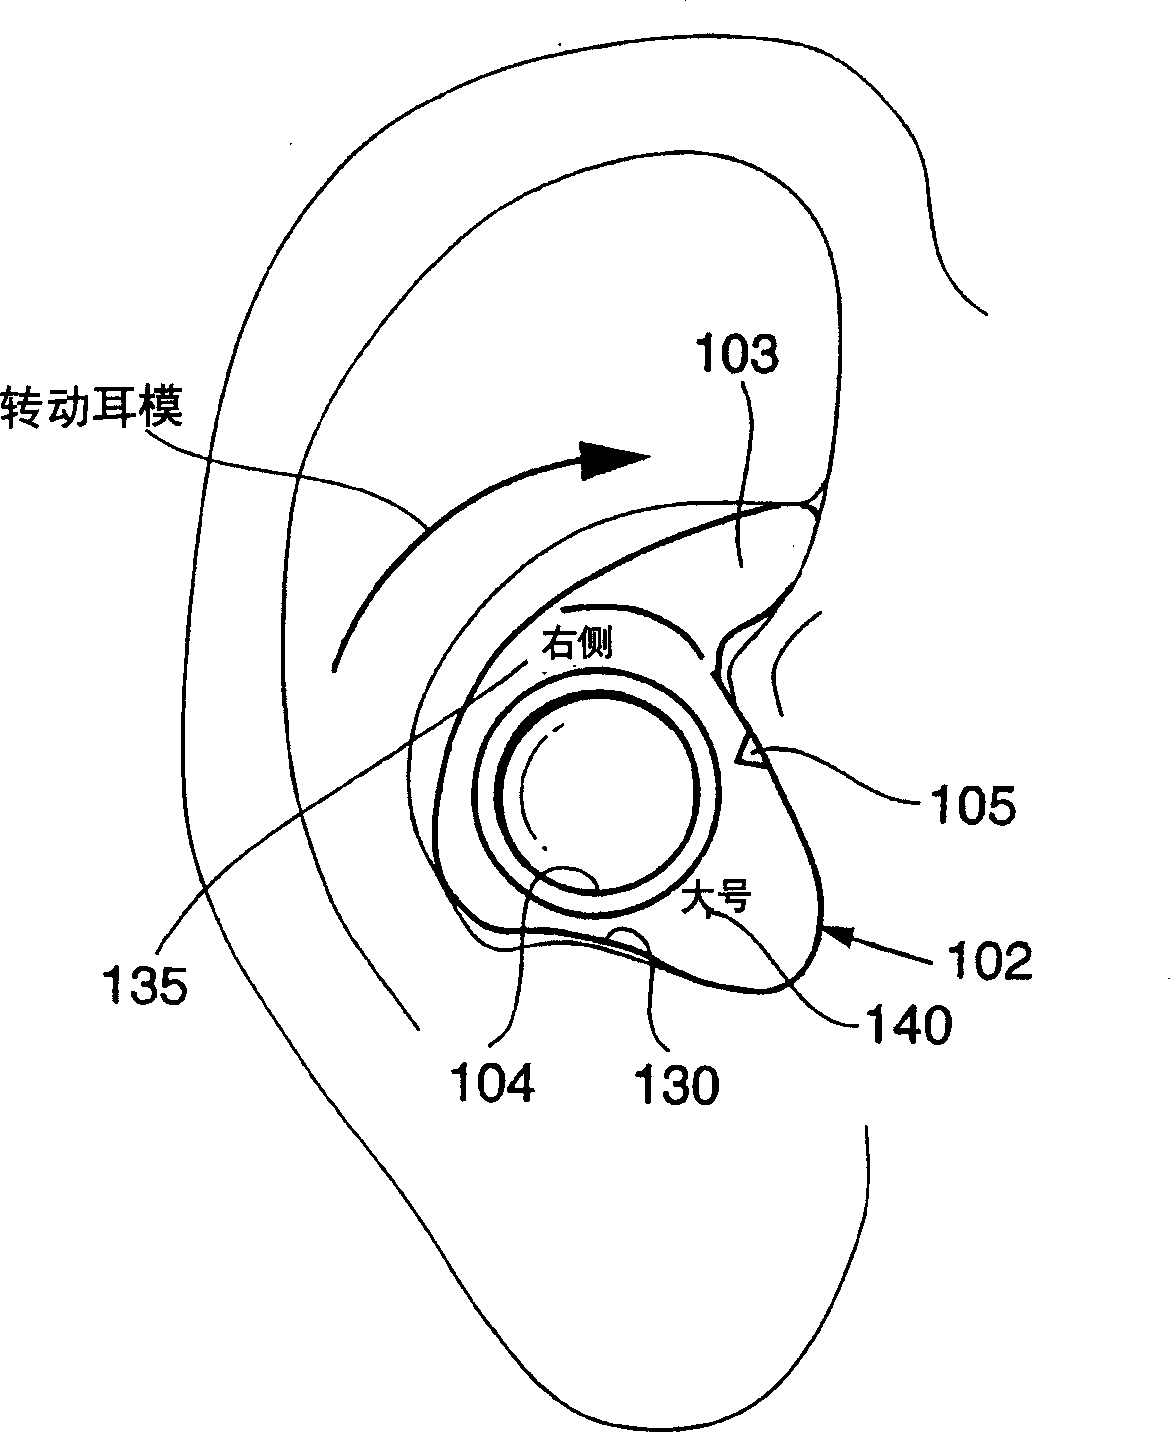 Retained ear mould for improving combination device